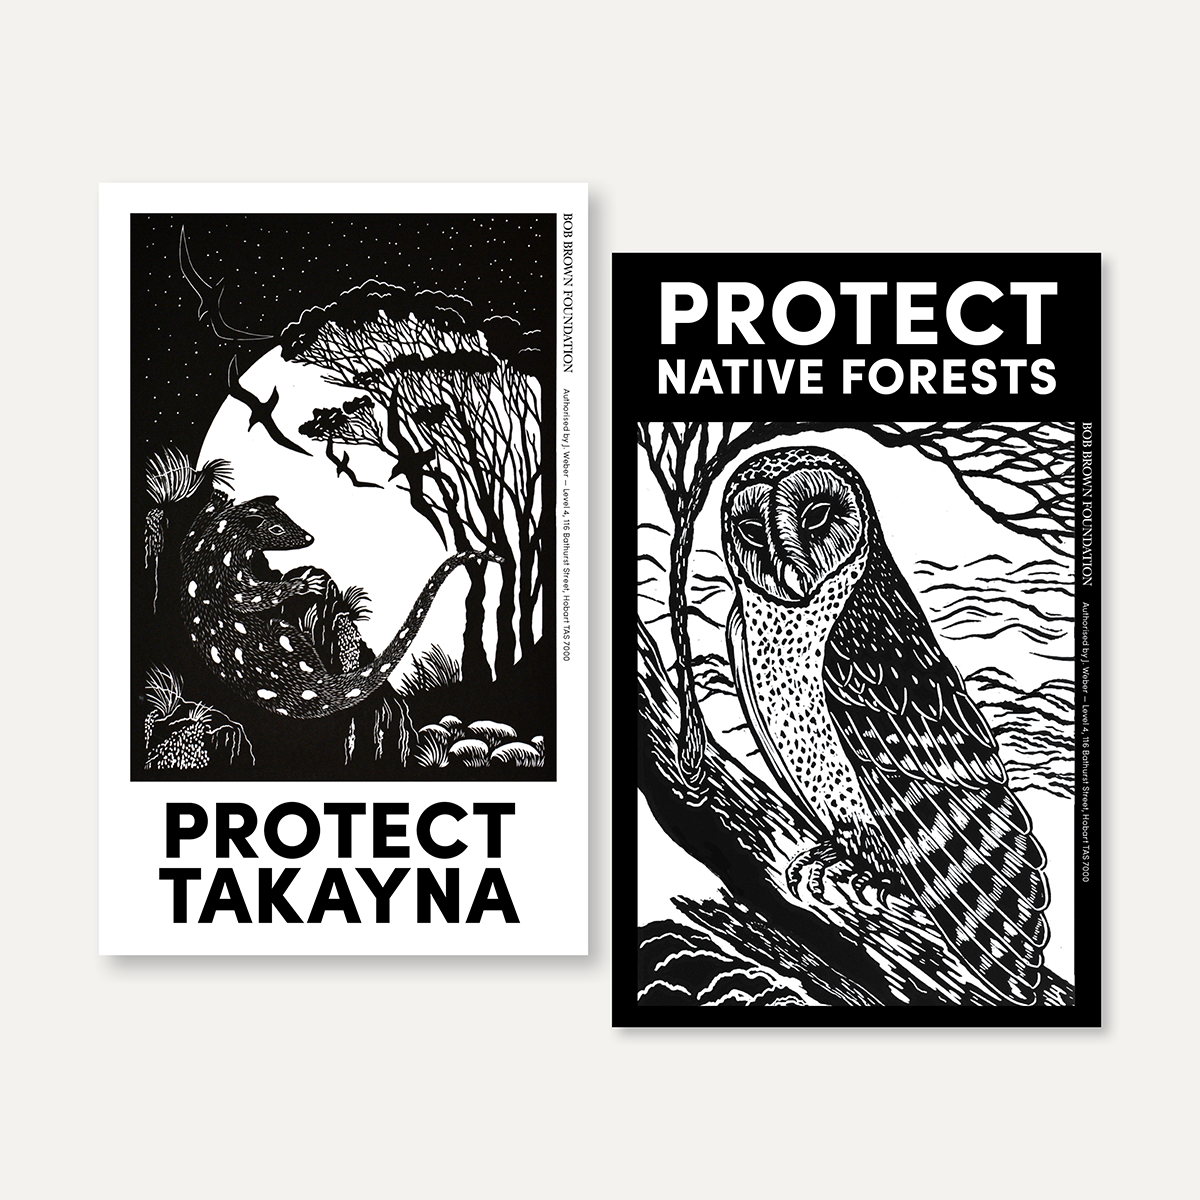 Protect takayna / Protect Native Forests – Anne Conran sticker set